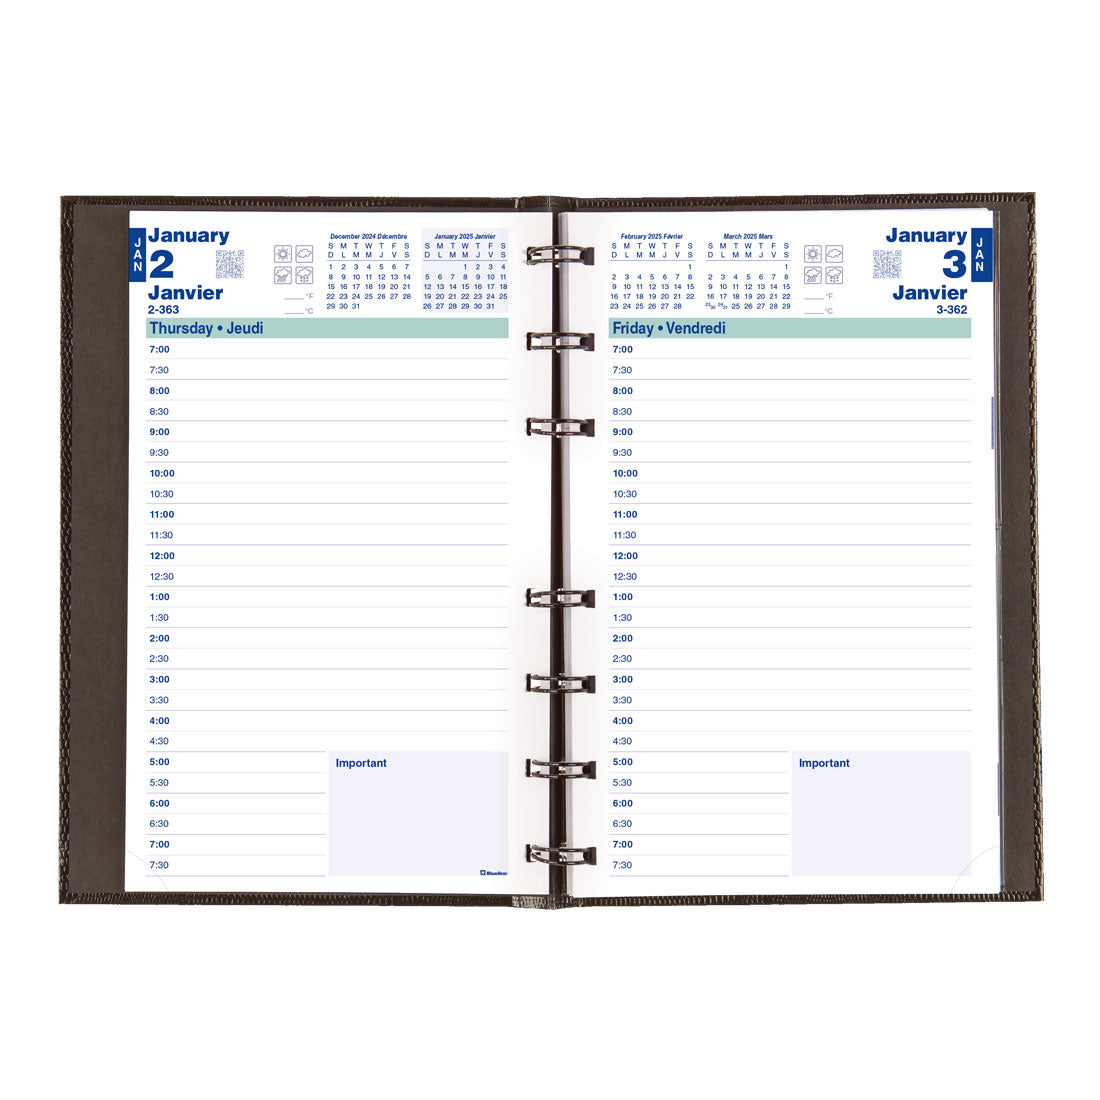 MiracleBind™/CoilPro Daily Planner 2025, Bilingual, Black, CF1503C.81B